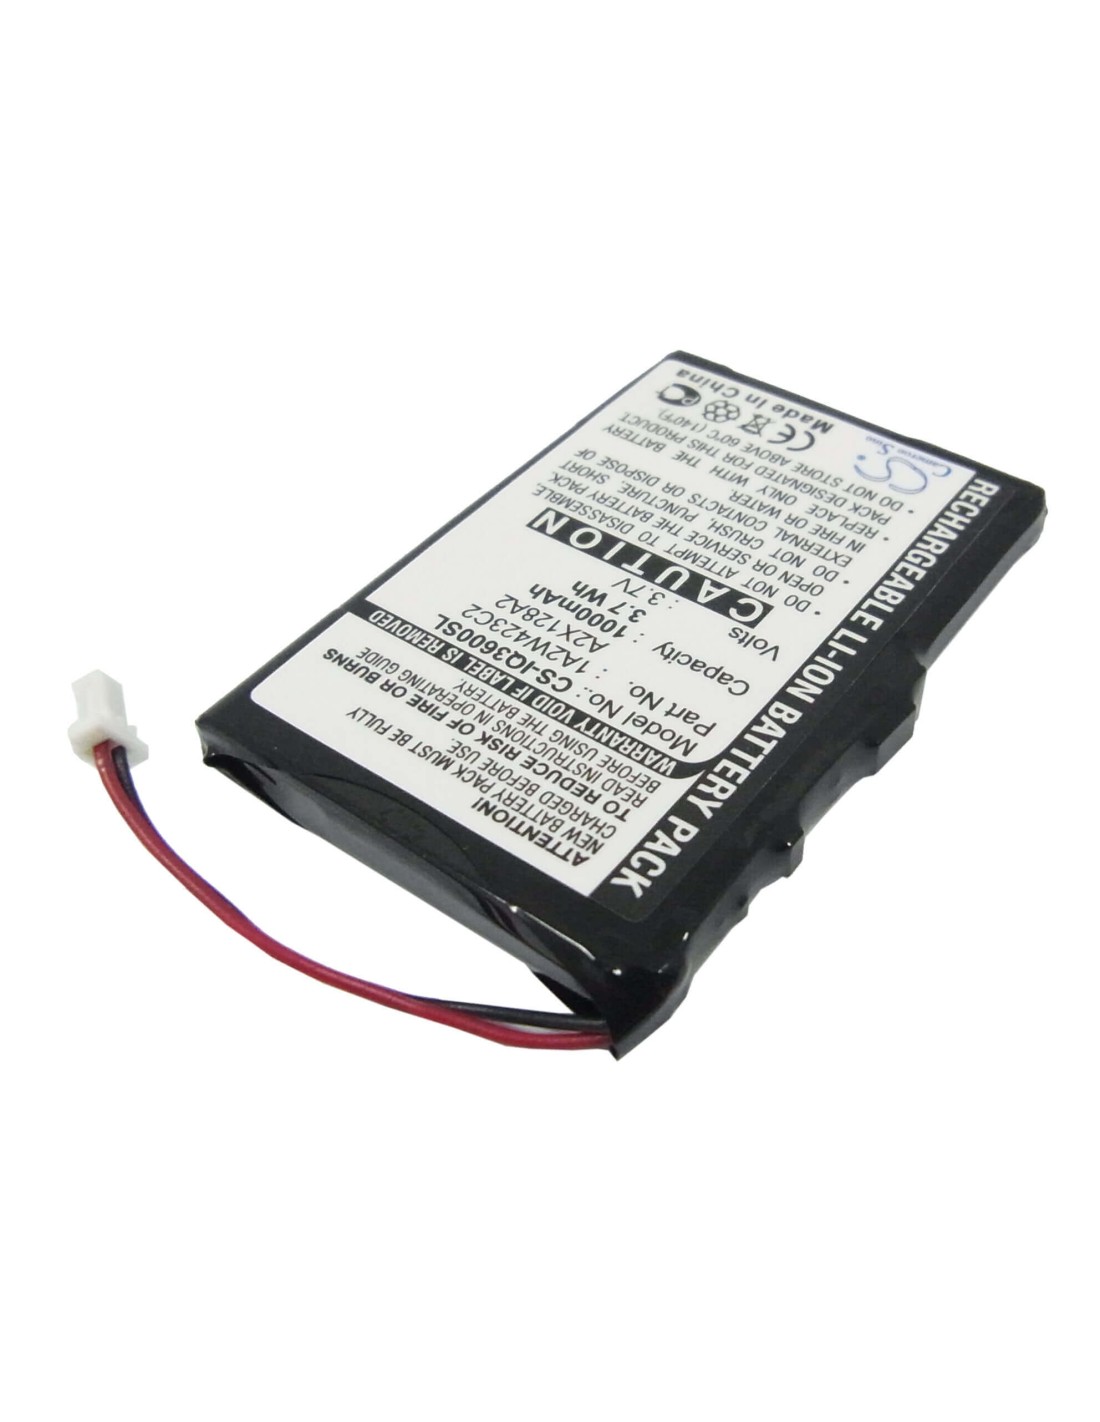 Battery for Garmin Ique 3200, Ique 3600, Ique 3600a 3.7V, 1000mAh - 3.70Wh